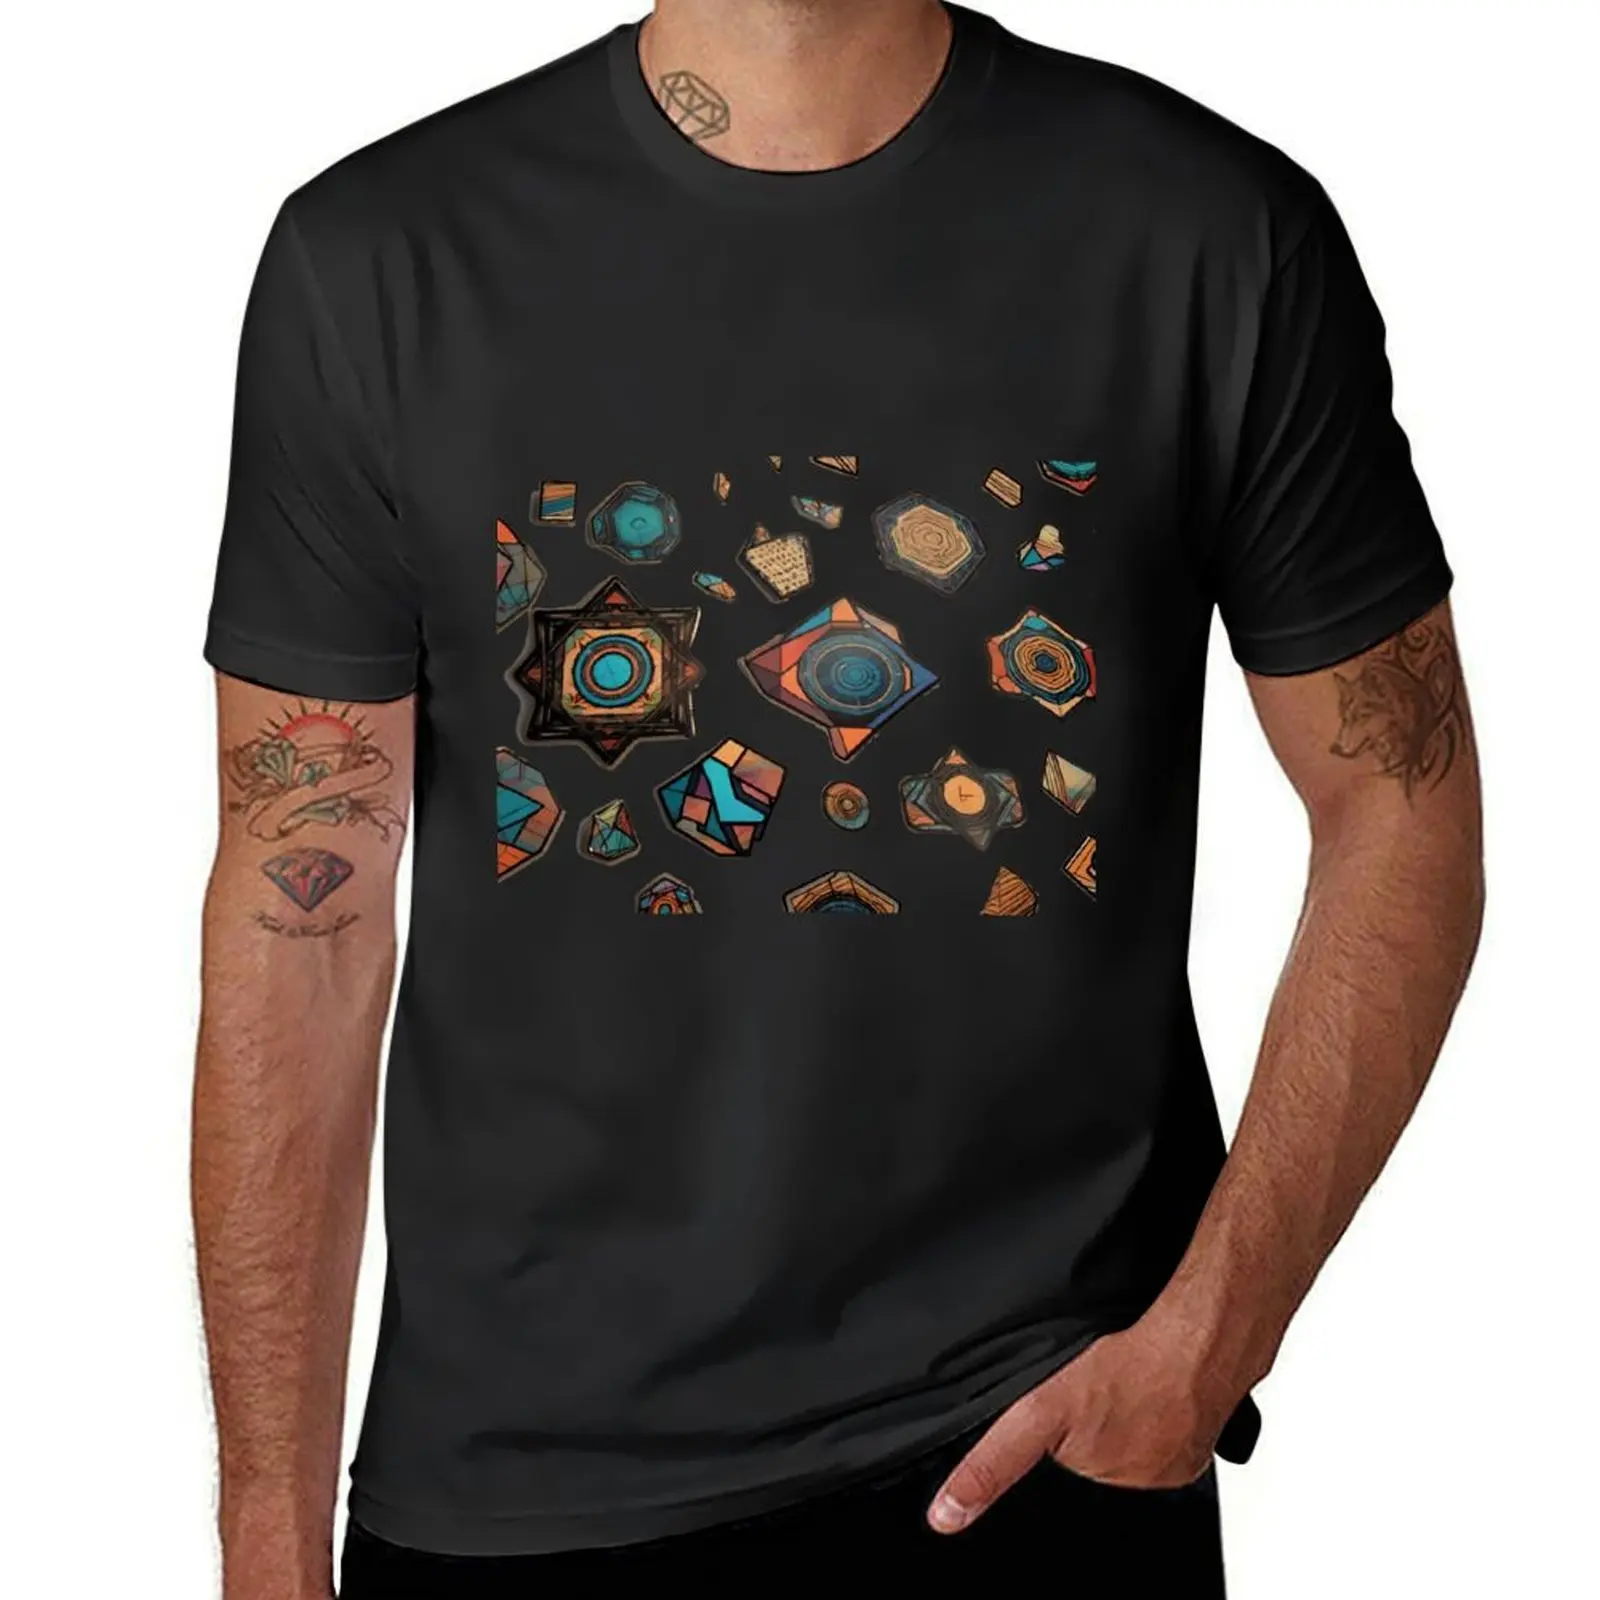 

Playing with Geometry: Abstract Shape Patterns (287) T-Shirt quick drying oversizeds tops mens tall t shirts